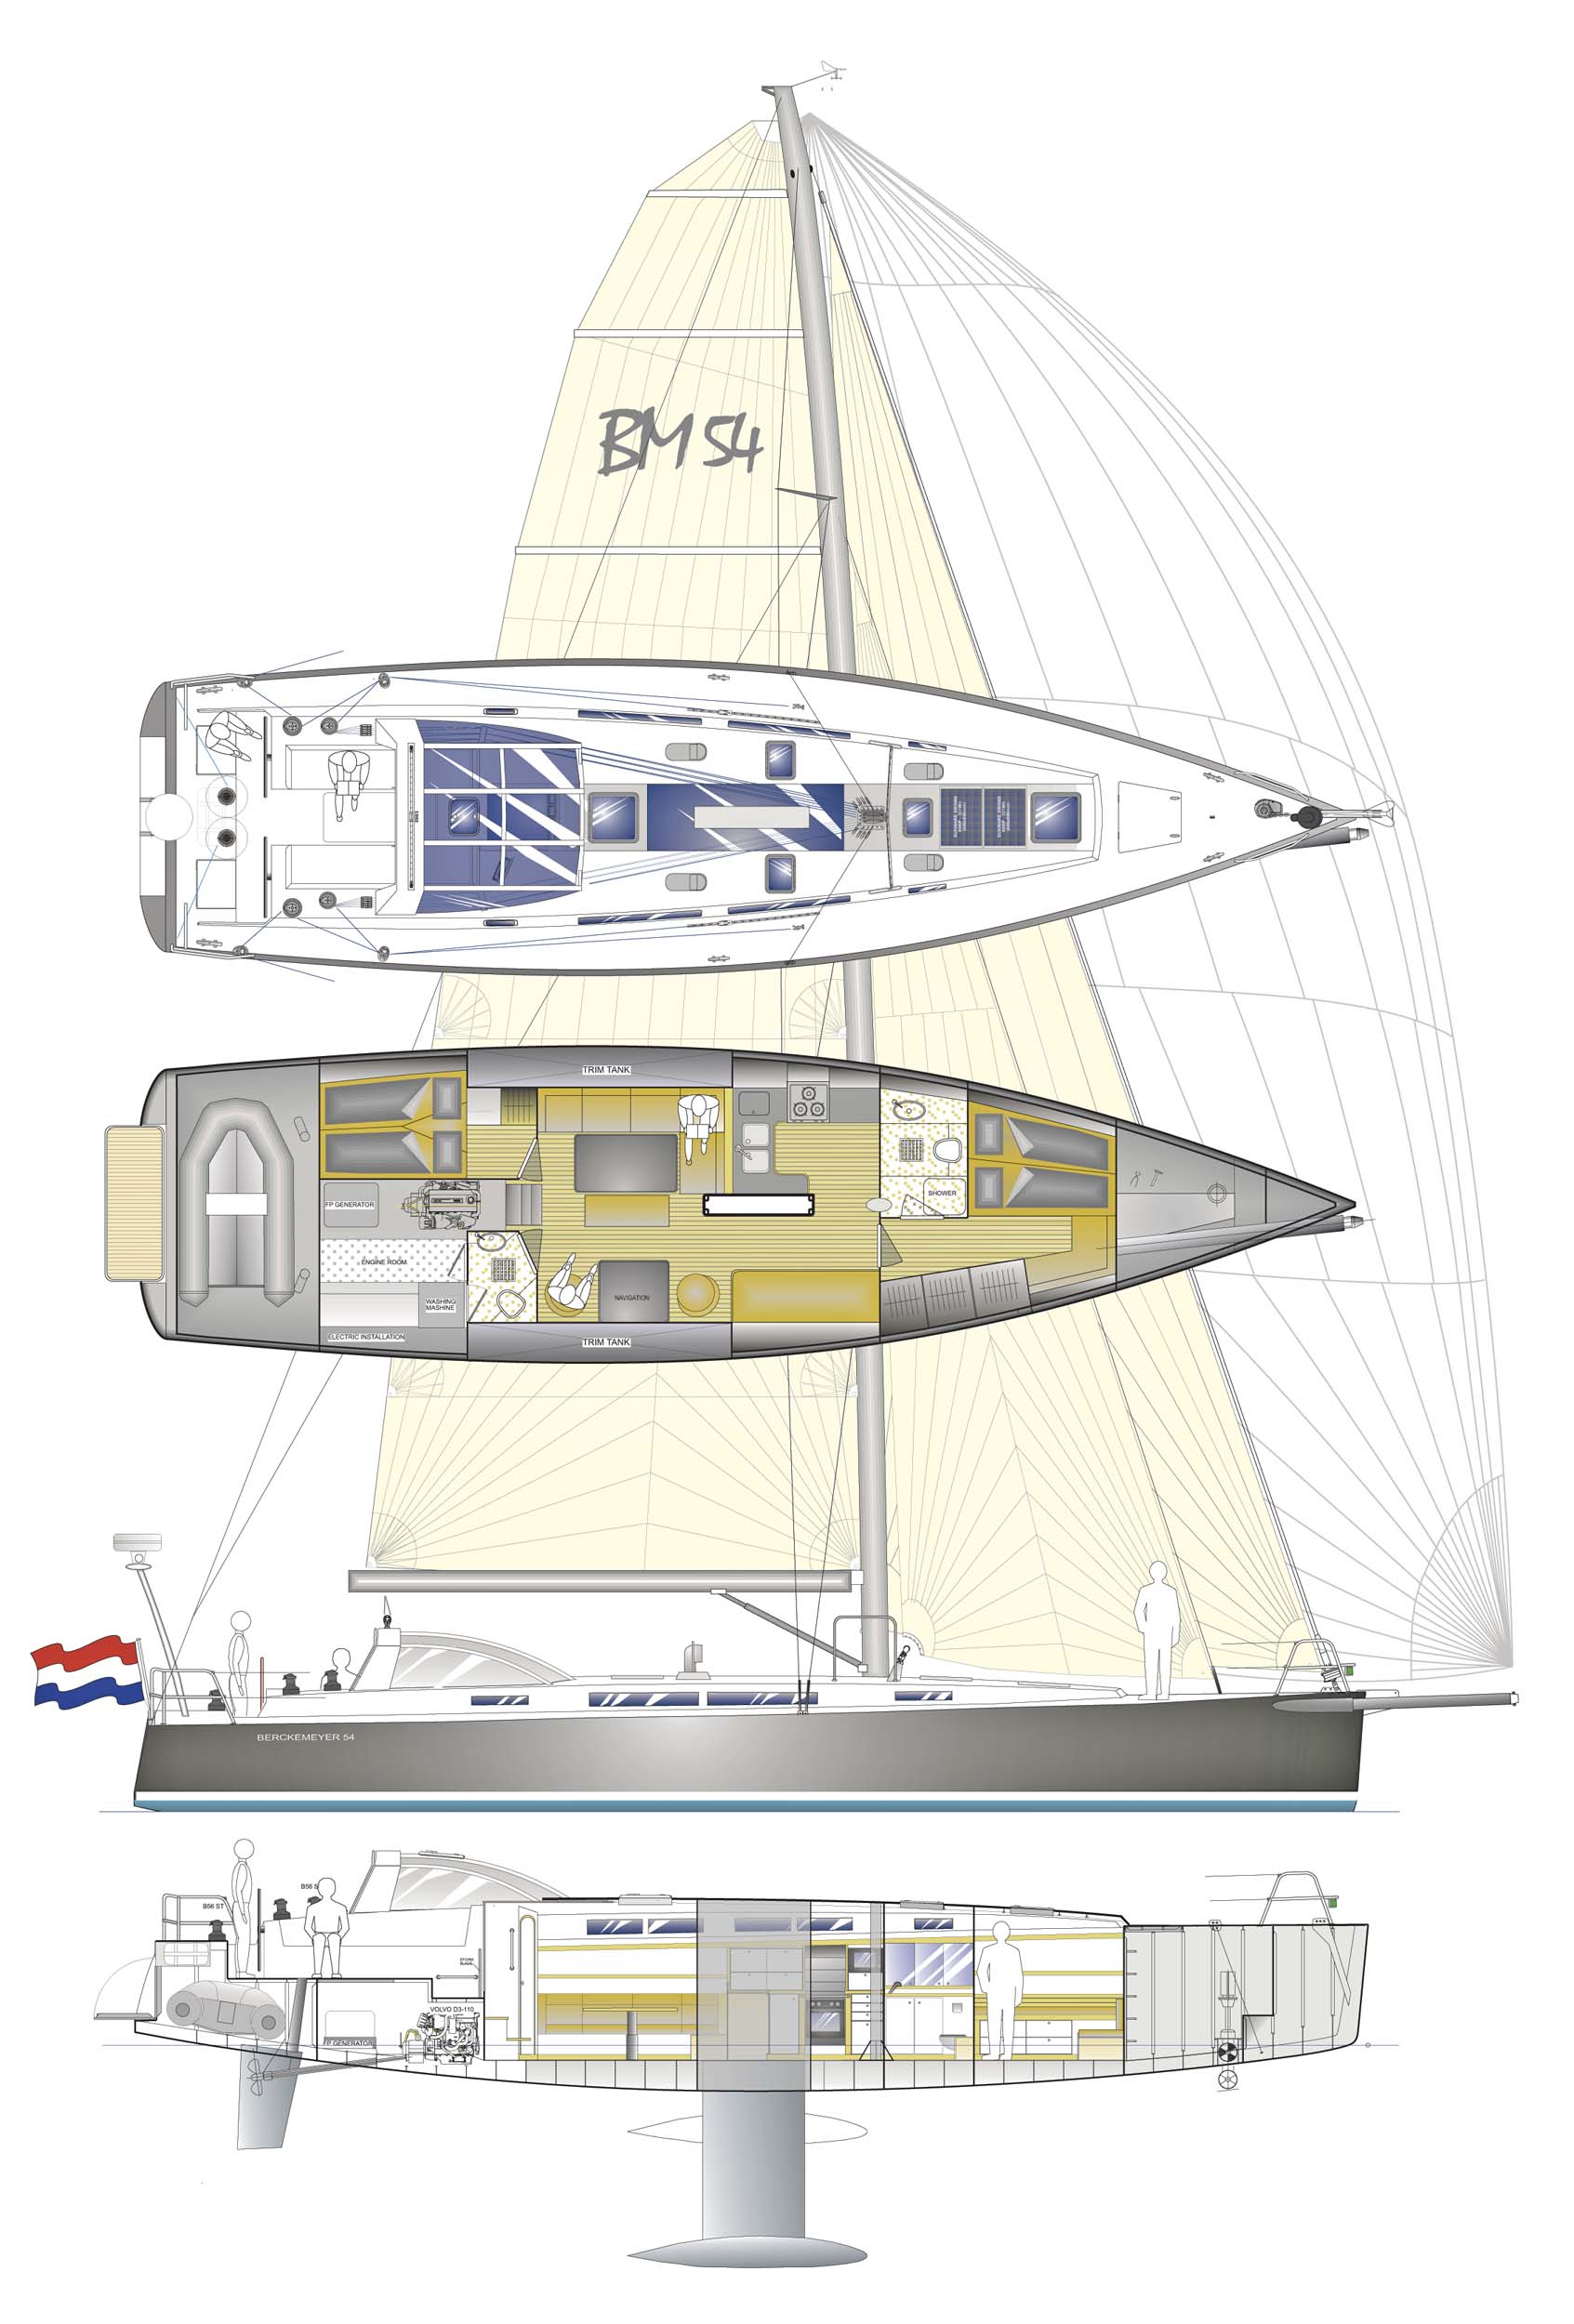 Berckemeyer Yacht Design | plans for modern and classic sailing yachts